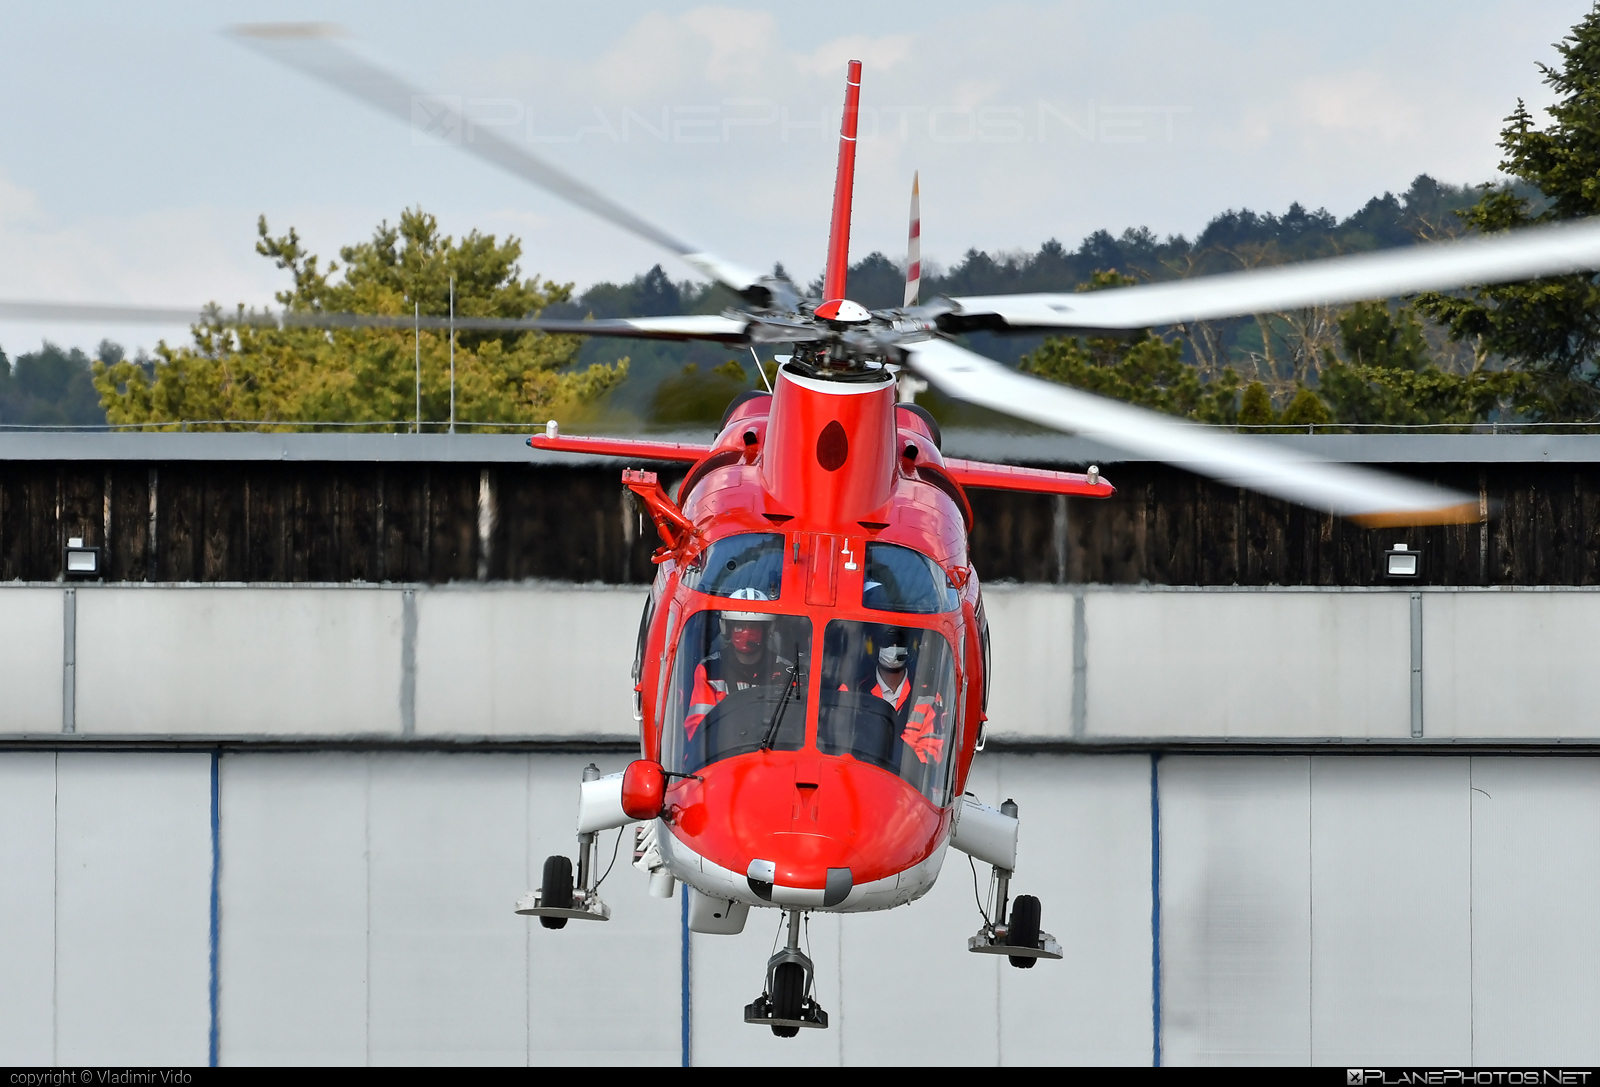 Agusta A109K2 - OM-ATJ operated by Air Transport Europe #a109 #a109k2 #agusta #agusta109 #agustaa109 #agustaa109k2 #airtransporteurope